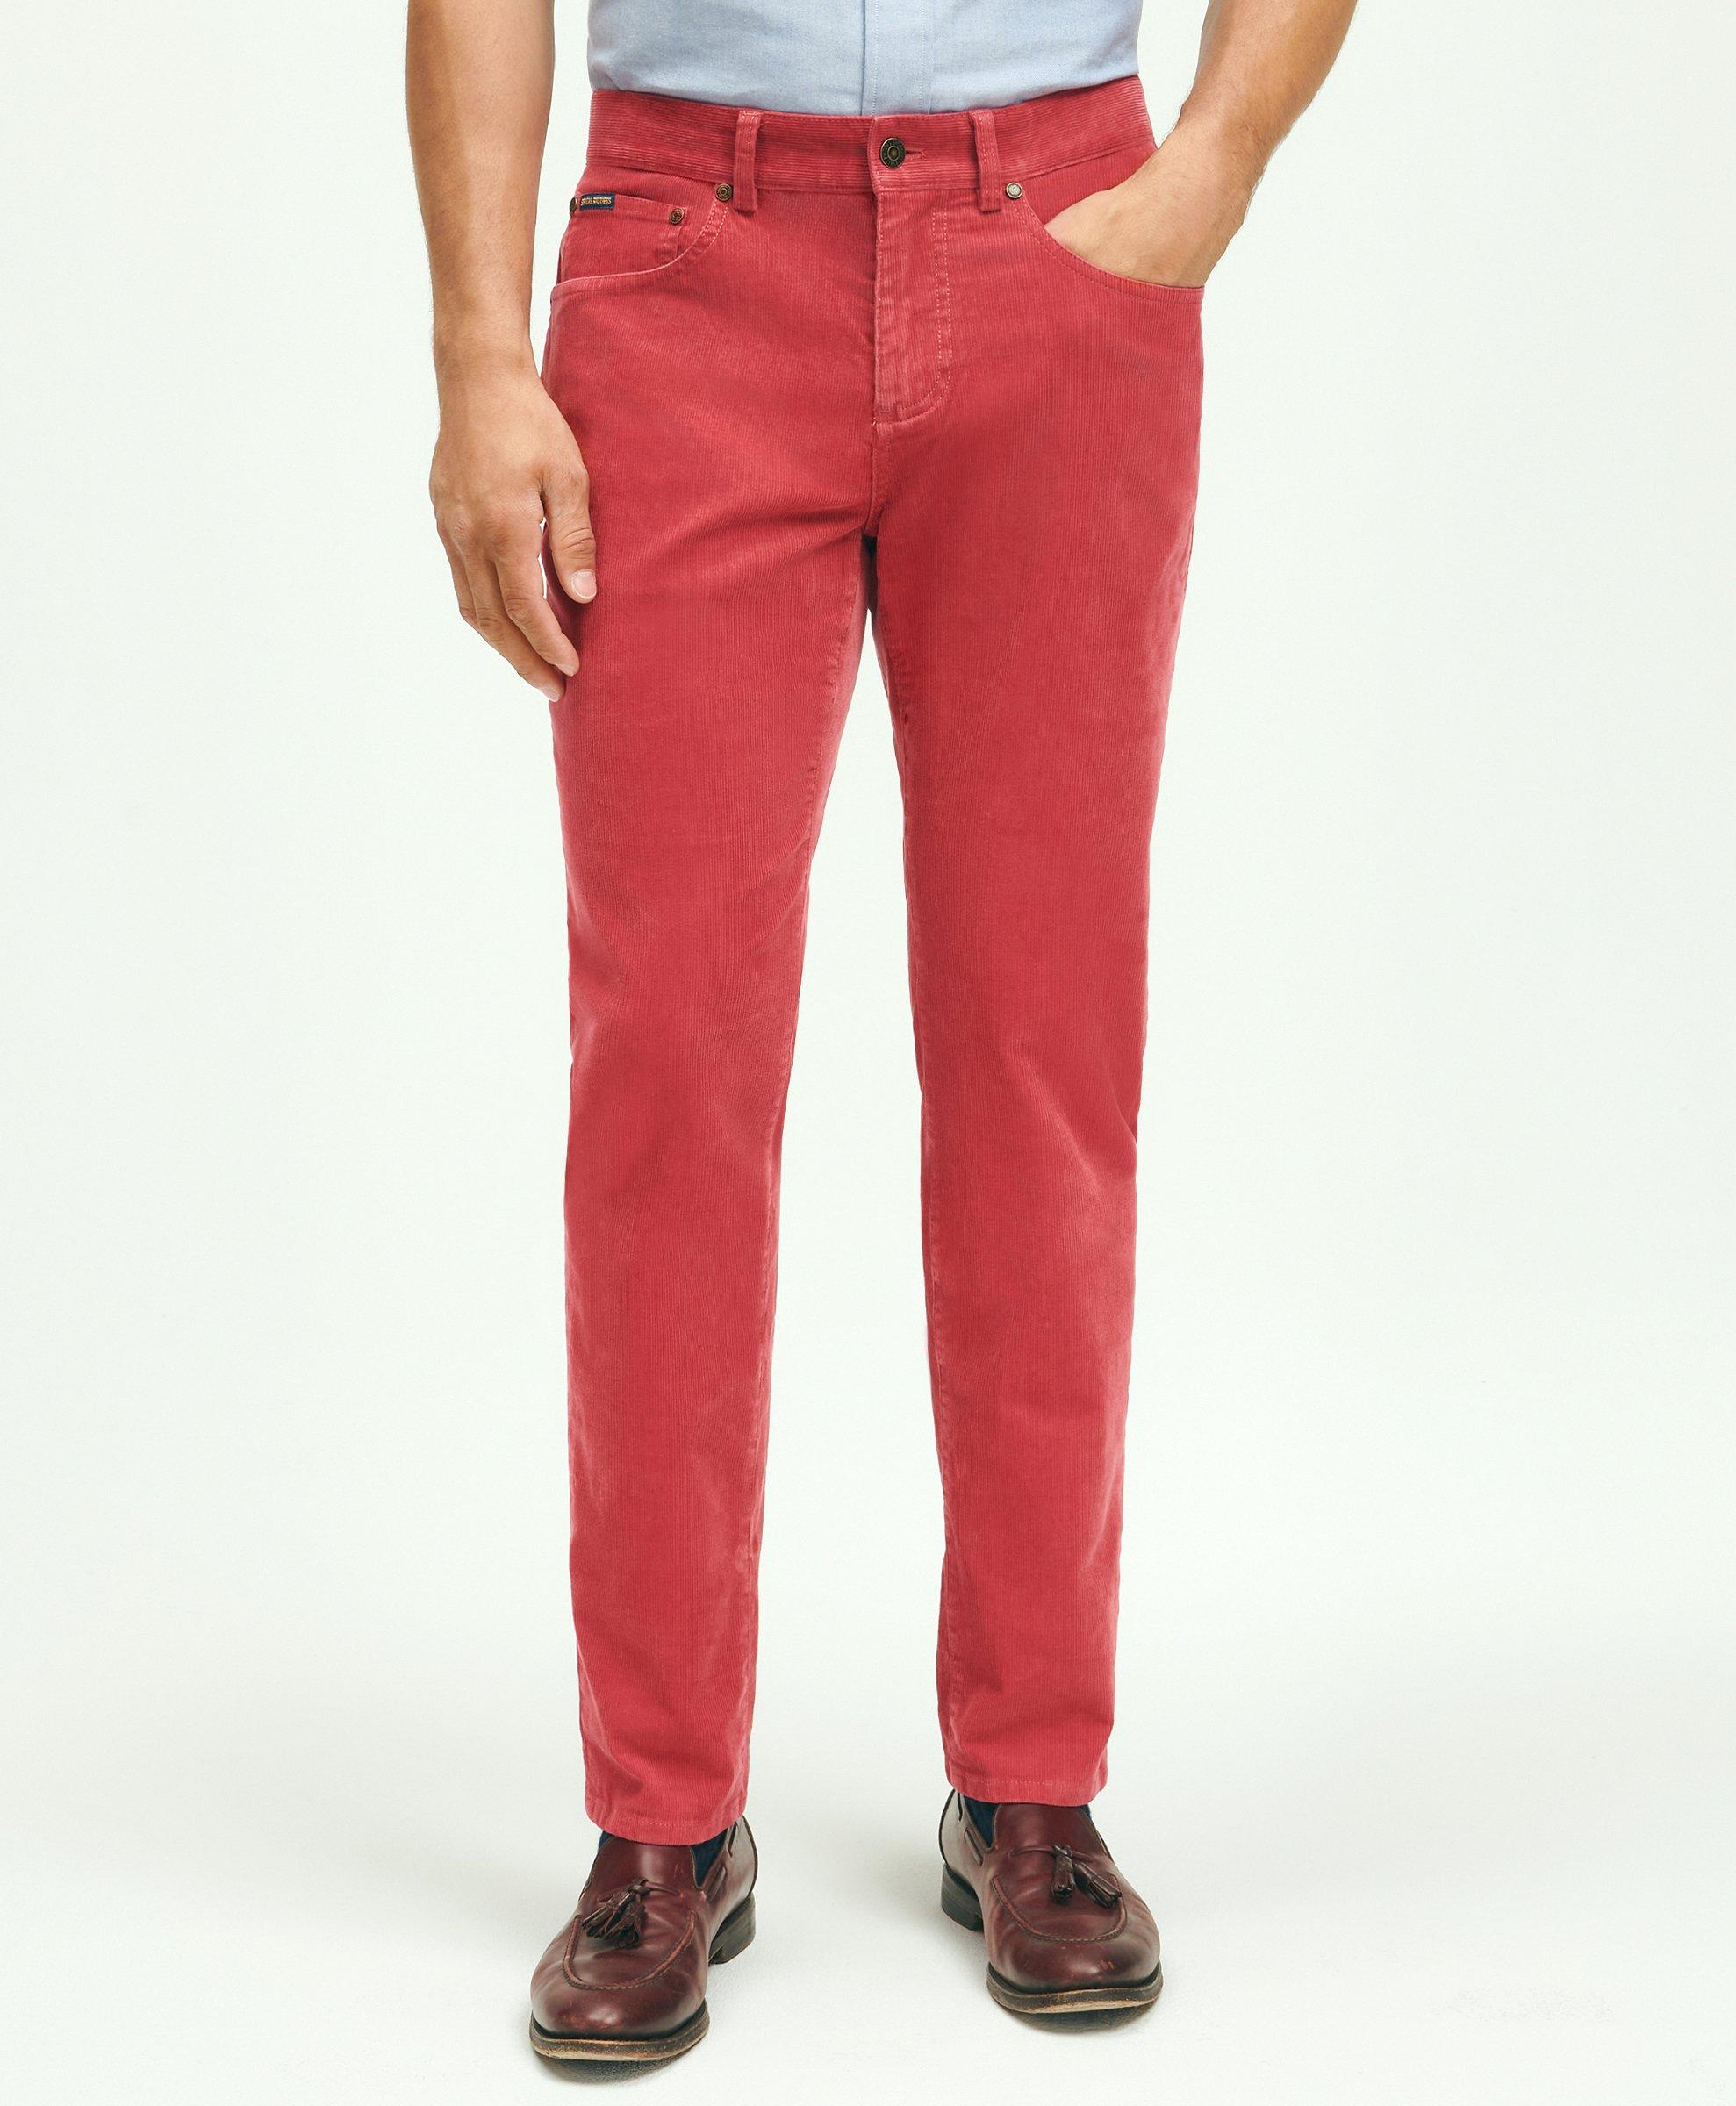 Stretch Cotton Fine-Wale Corduroy Embroidered Pants